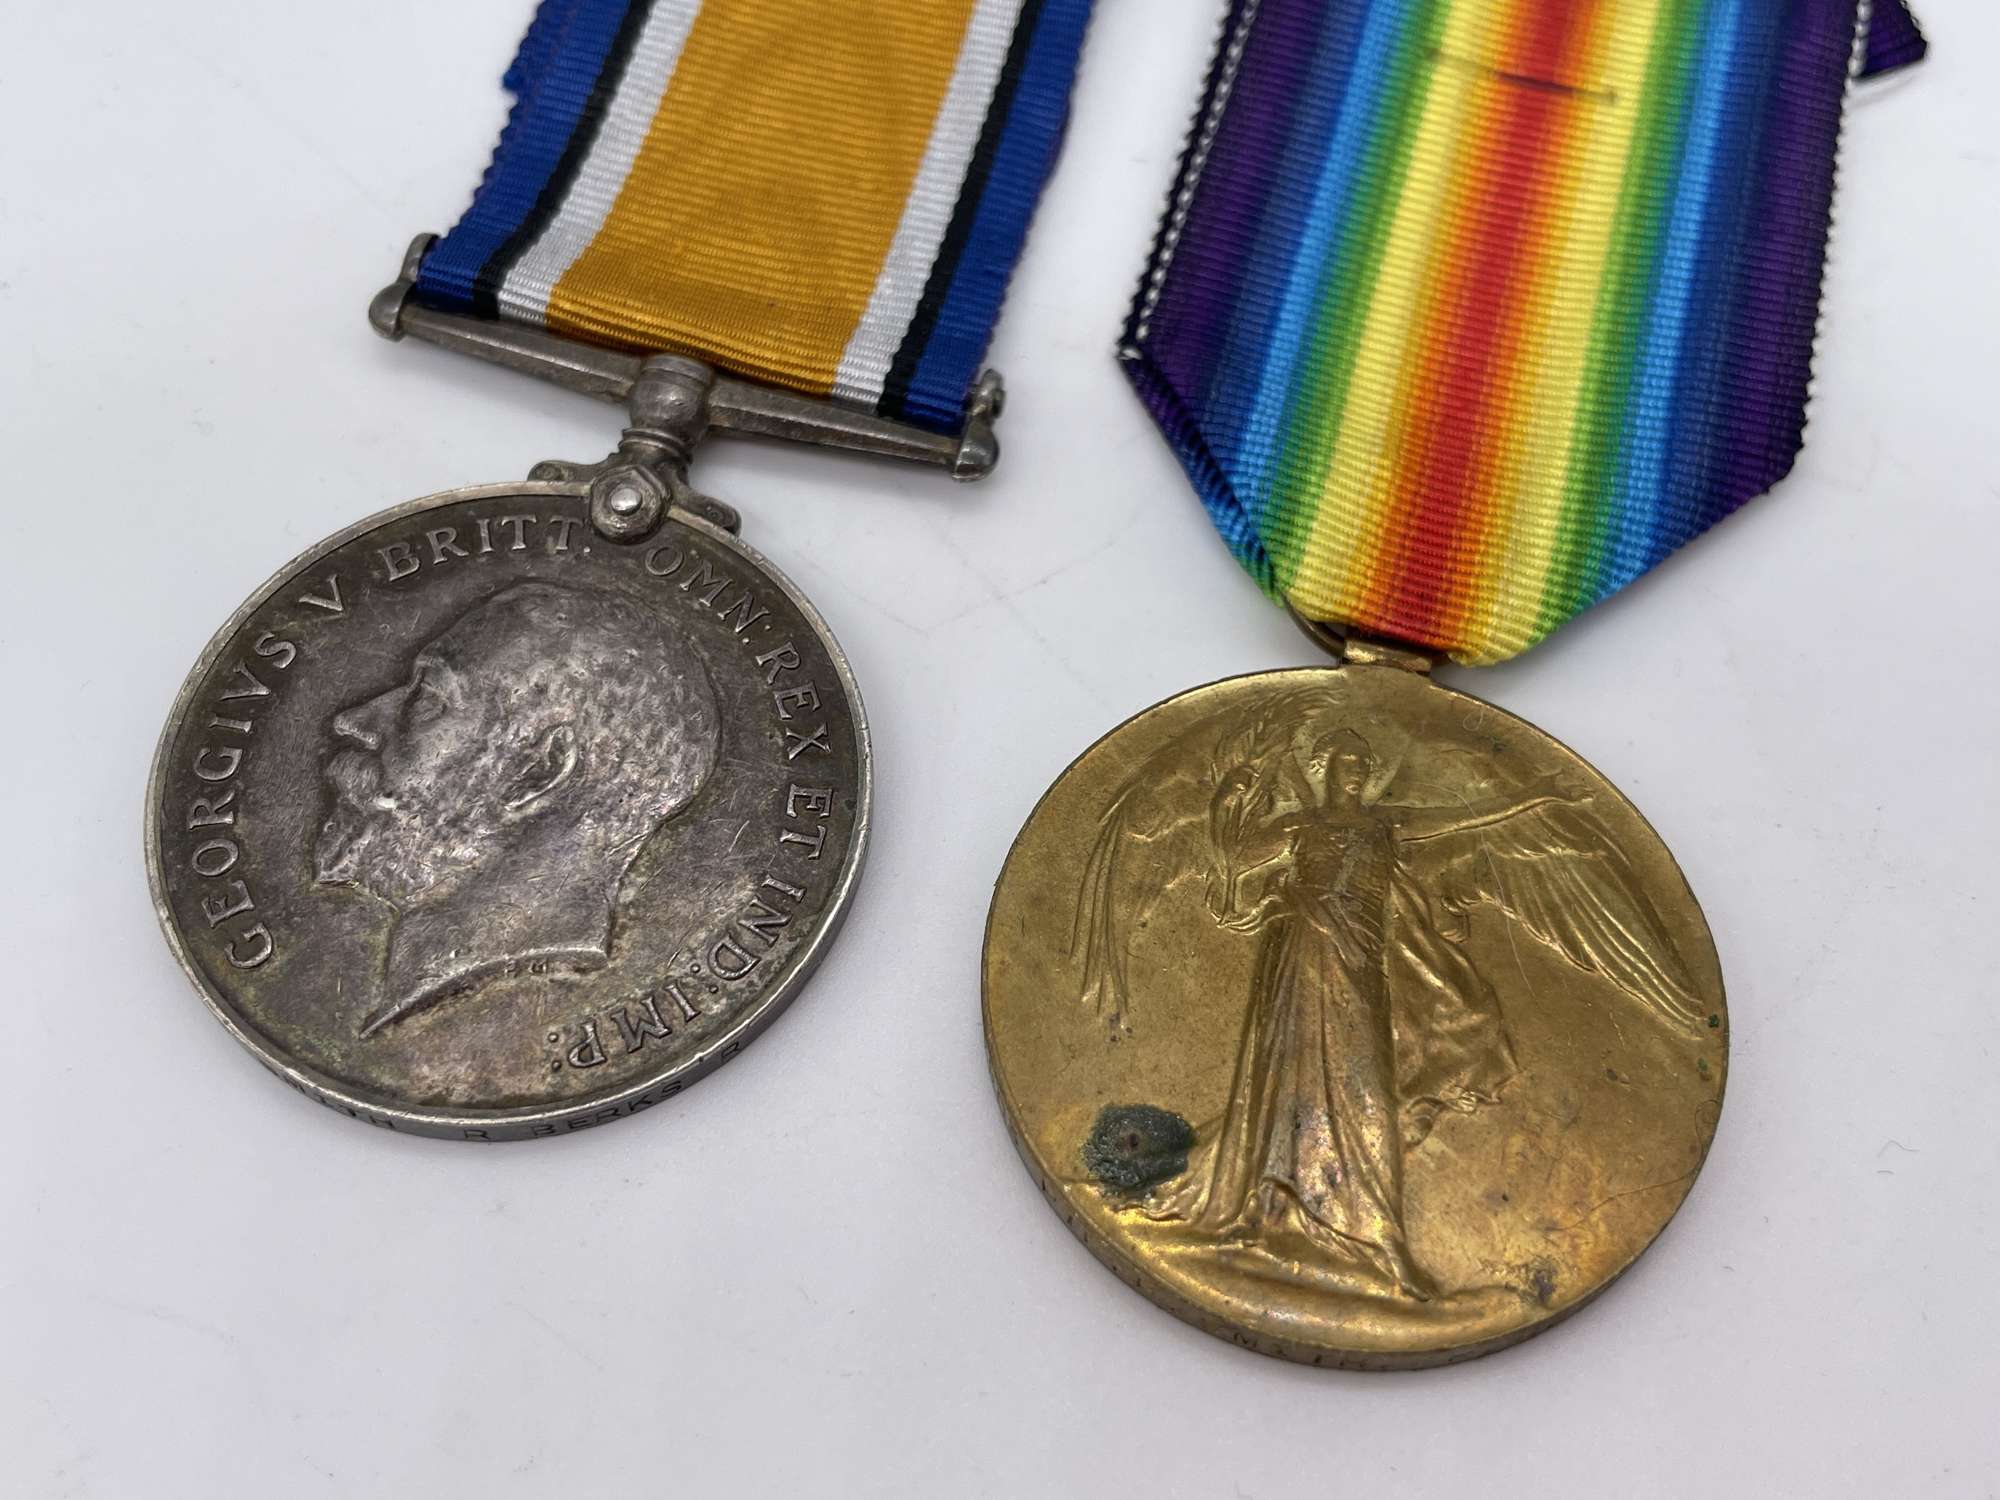 Original World War One Medal Pair, Pte Smith, Berkshire Regiment, KIA 1st Day of the Somme